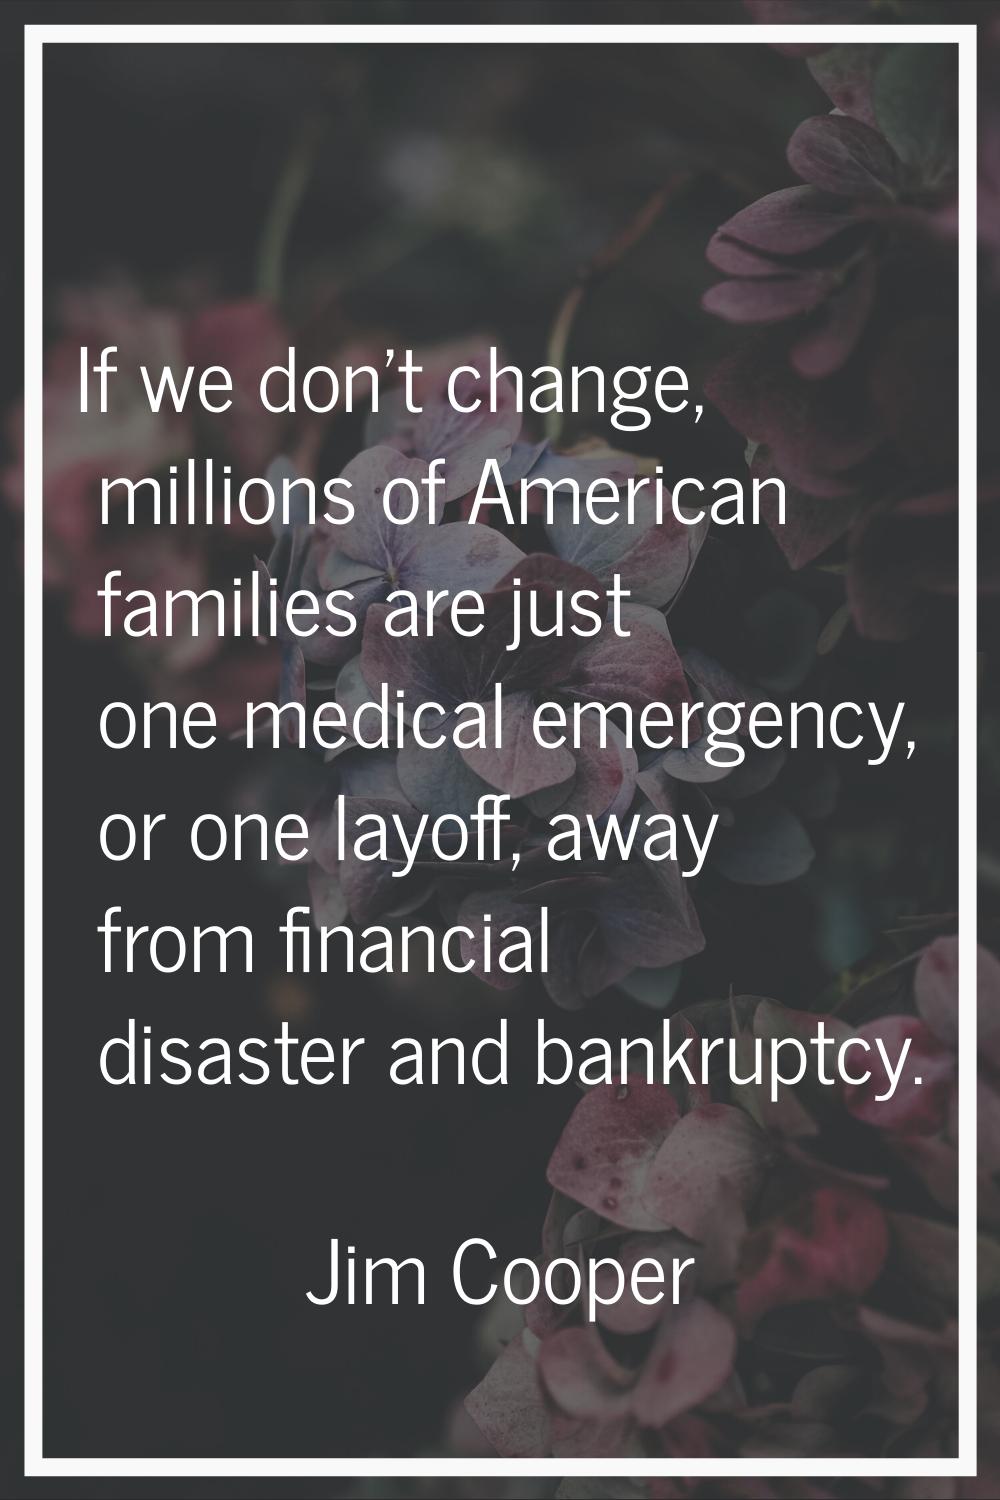 If we don't change, millions of American families are just one medical emergency, or one layoff, aw